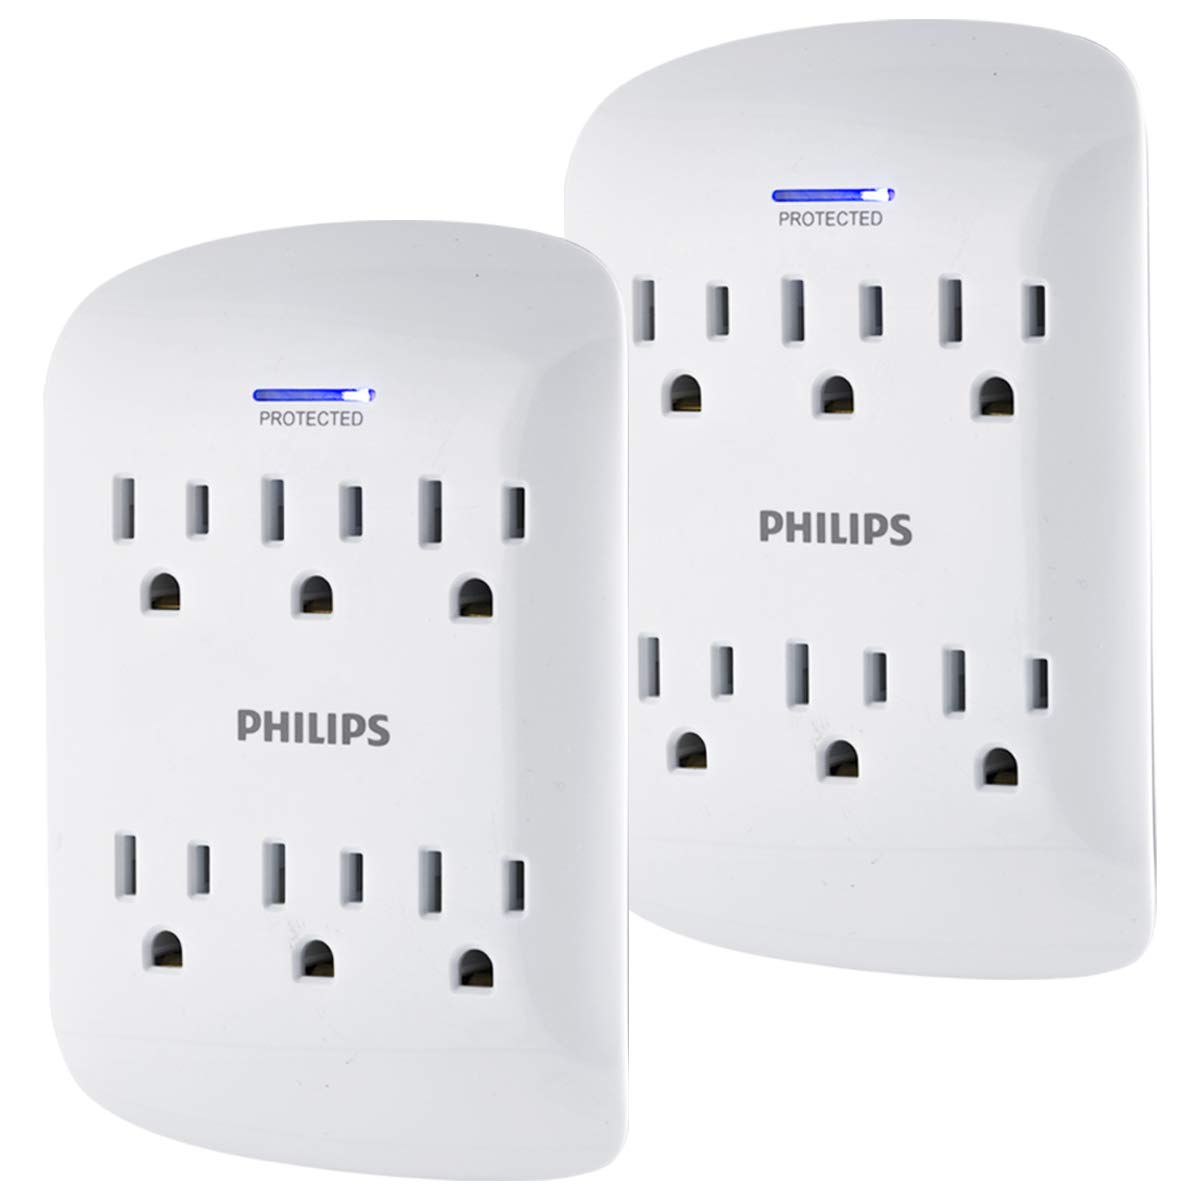 PHILIPS Surge Protector Wall Tap, 2-Pack